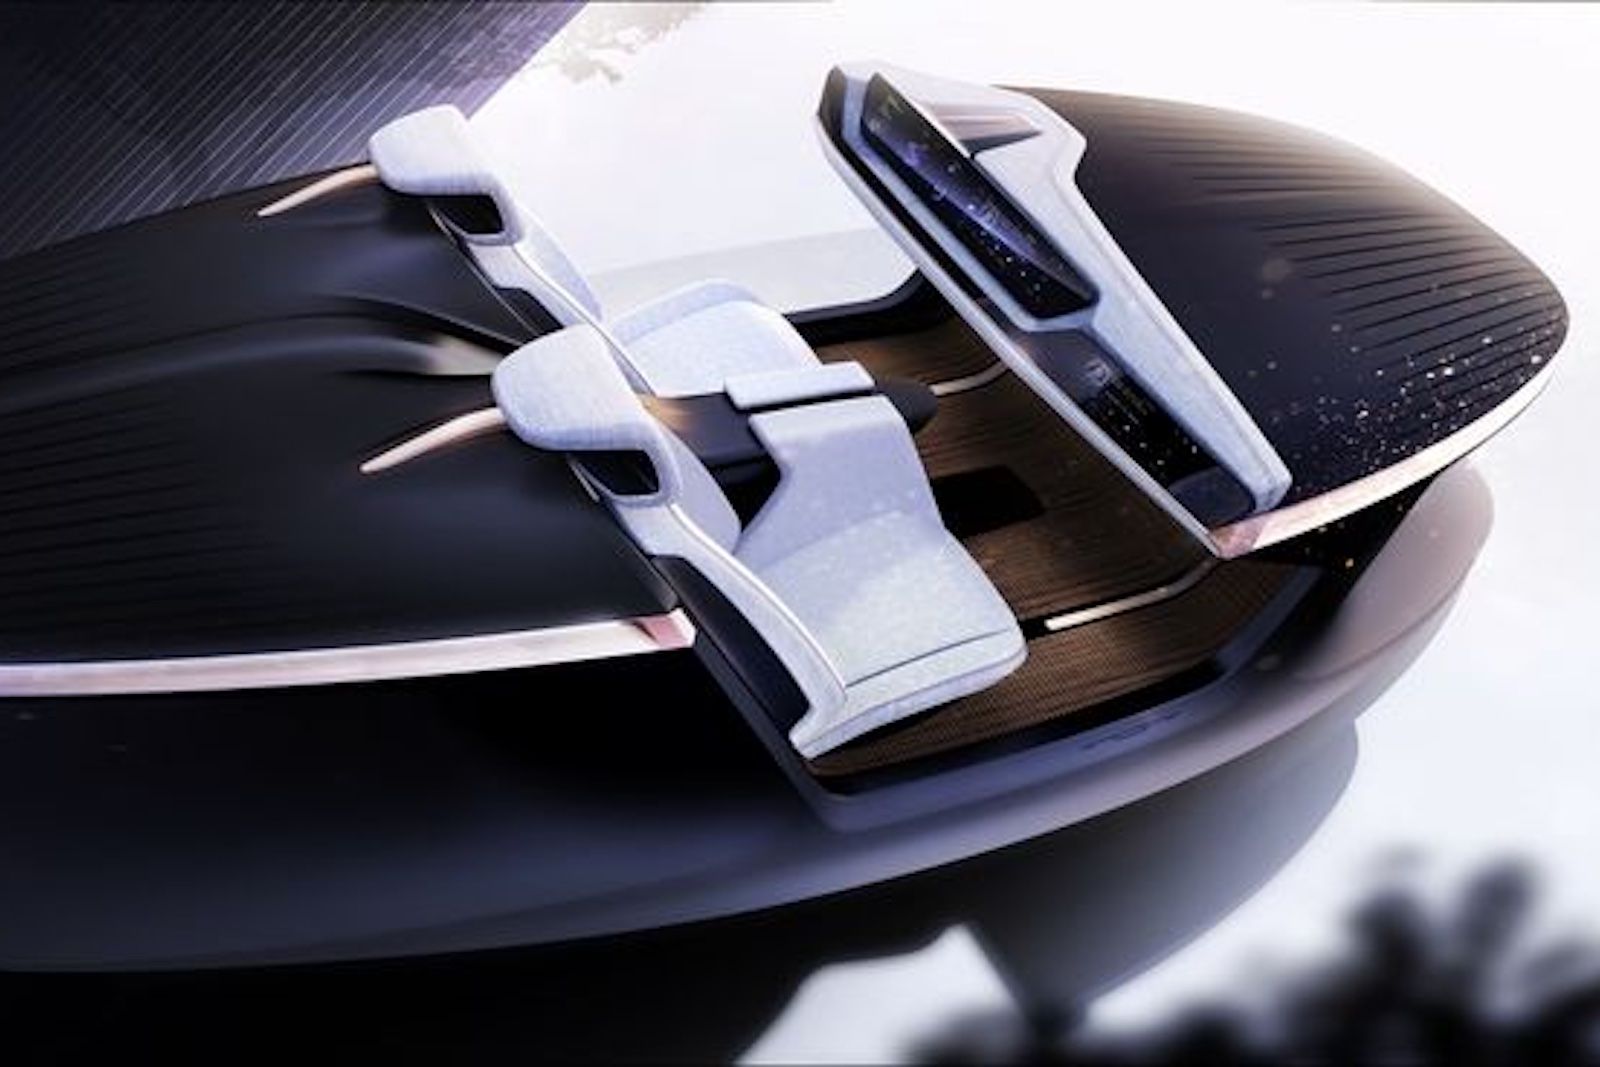 Chrysler’s Synthesis cockpit concept shows the future of driving photo 1